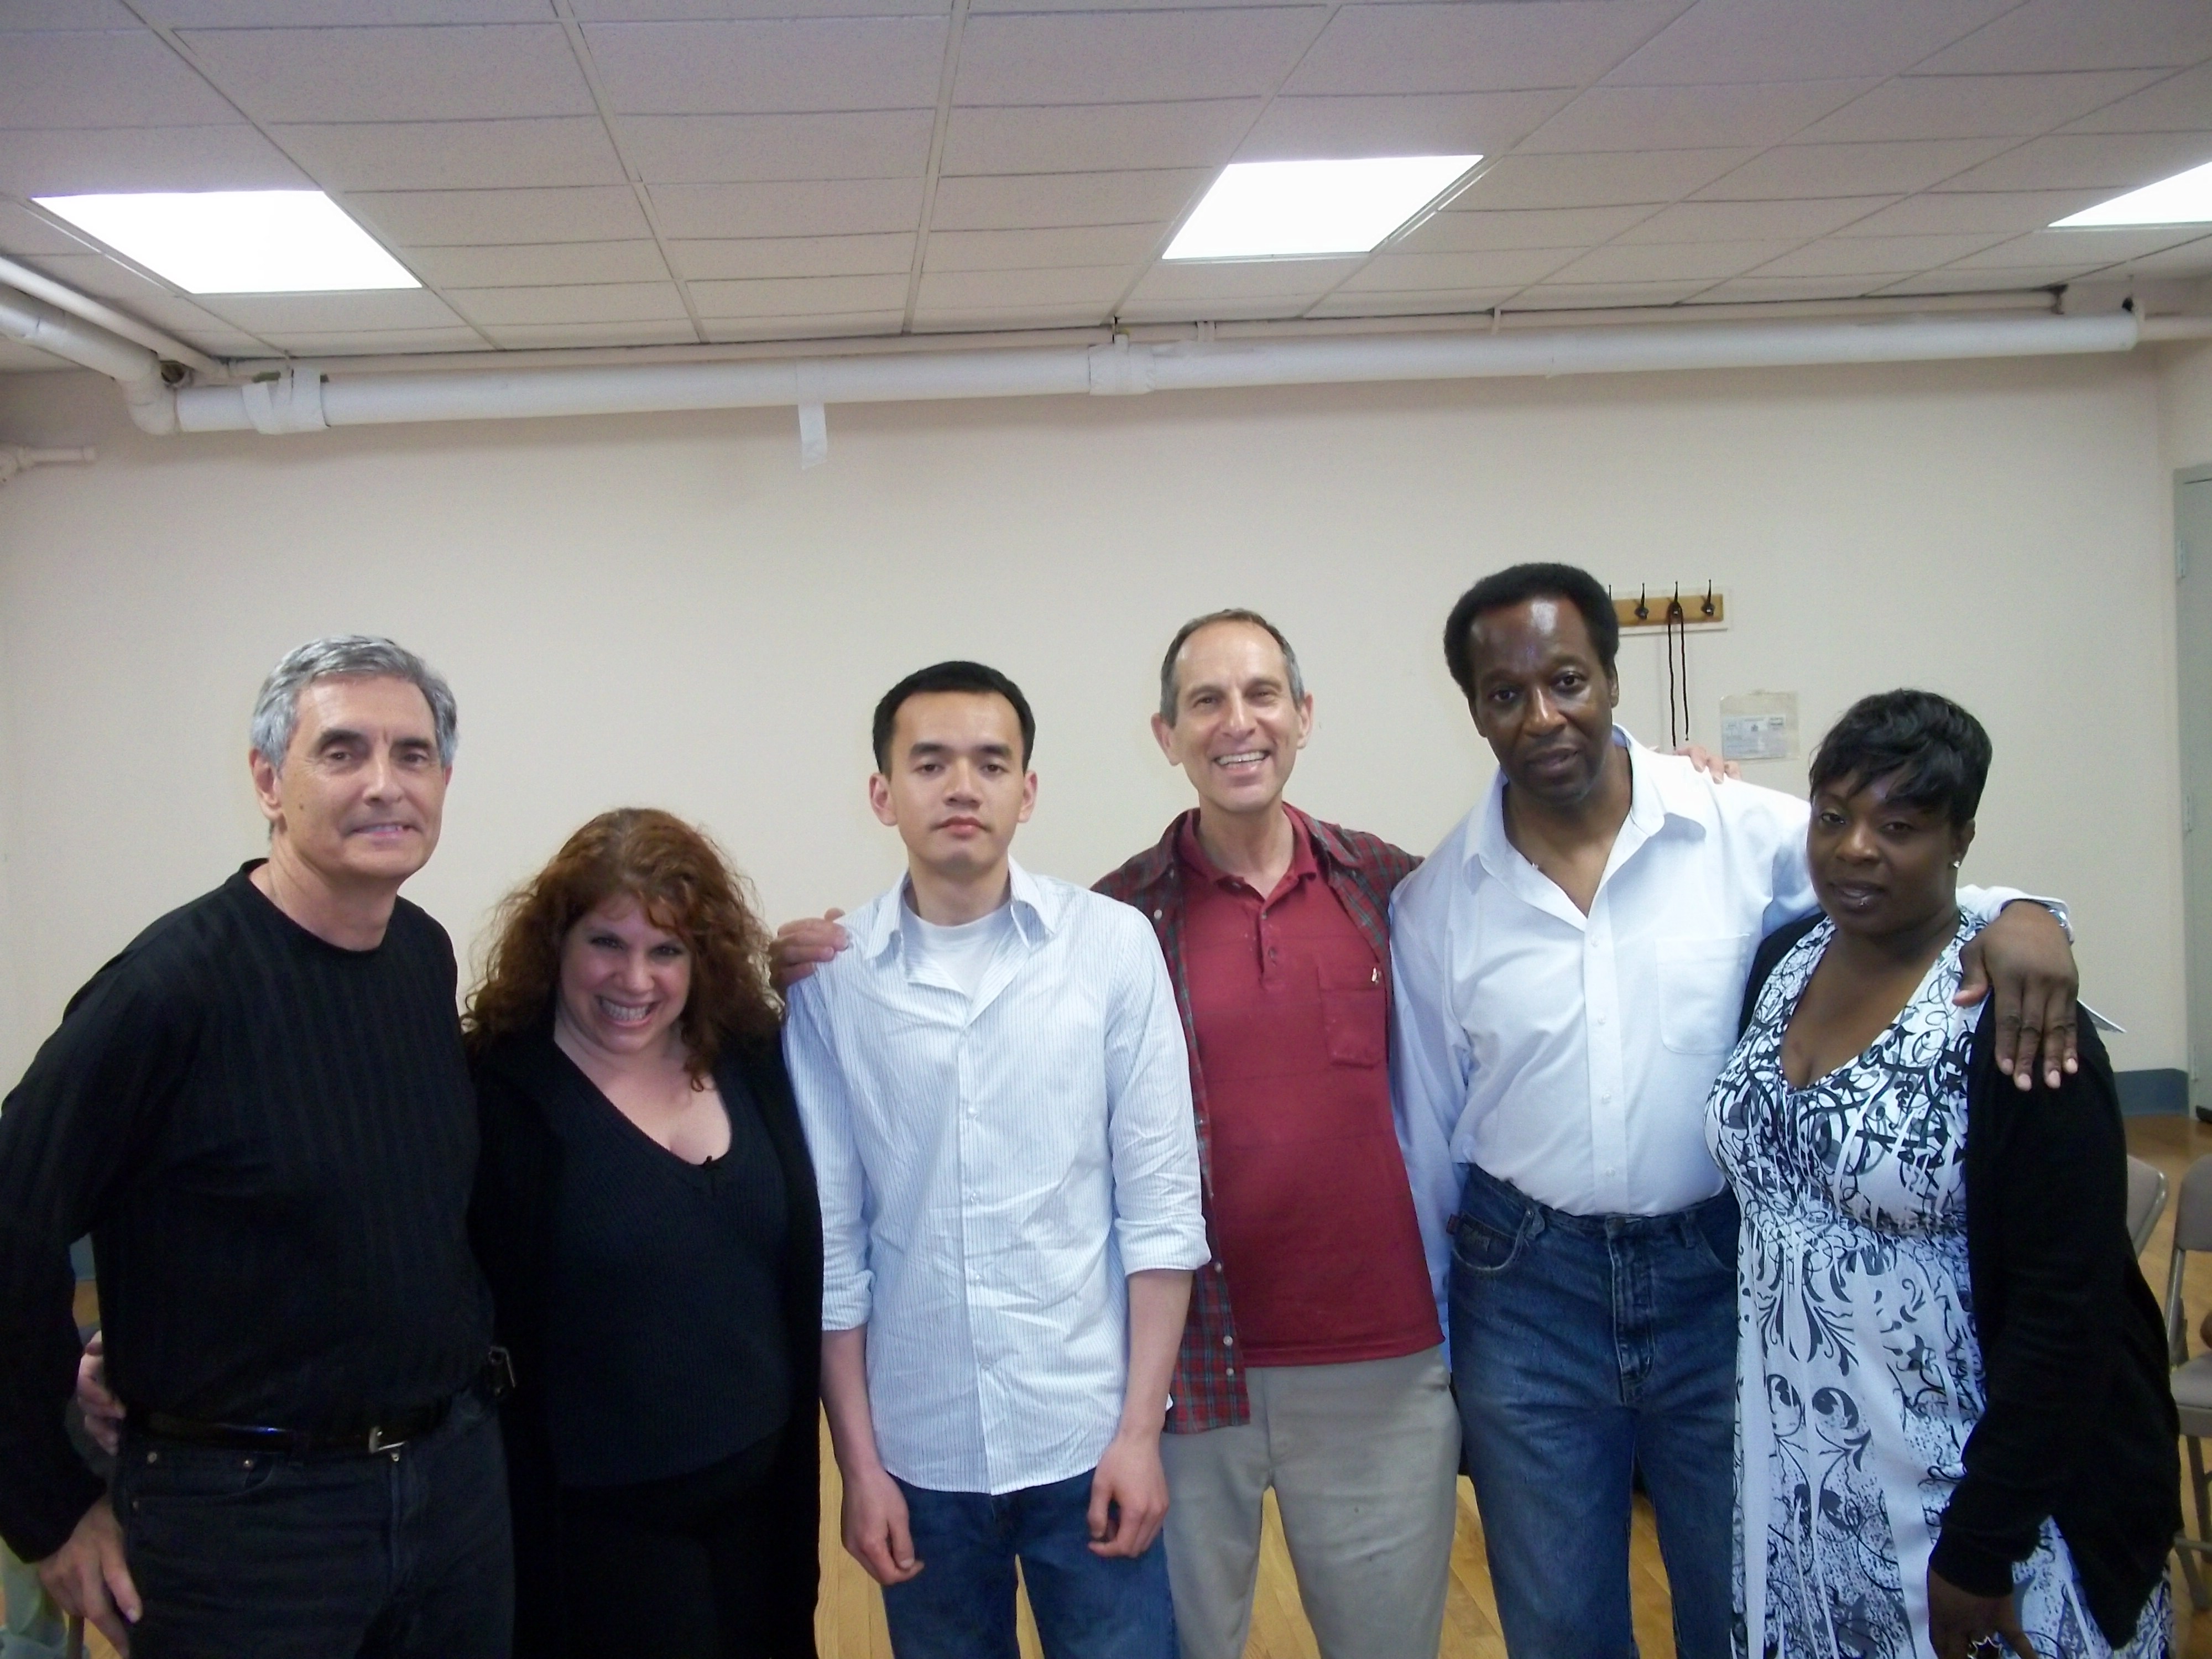 Phil, center, with the cast of Blacks and White.